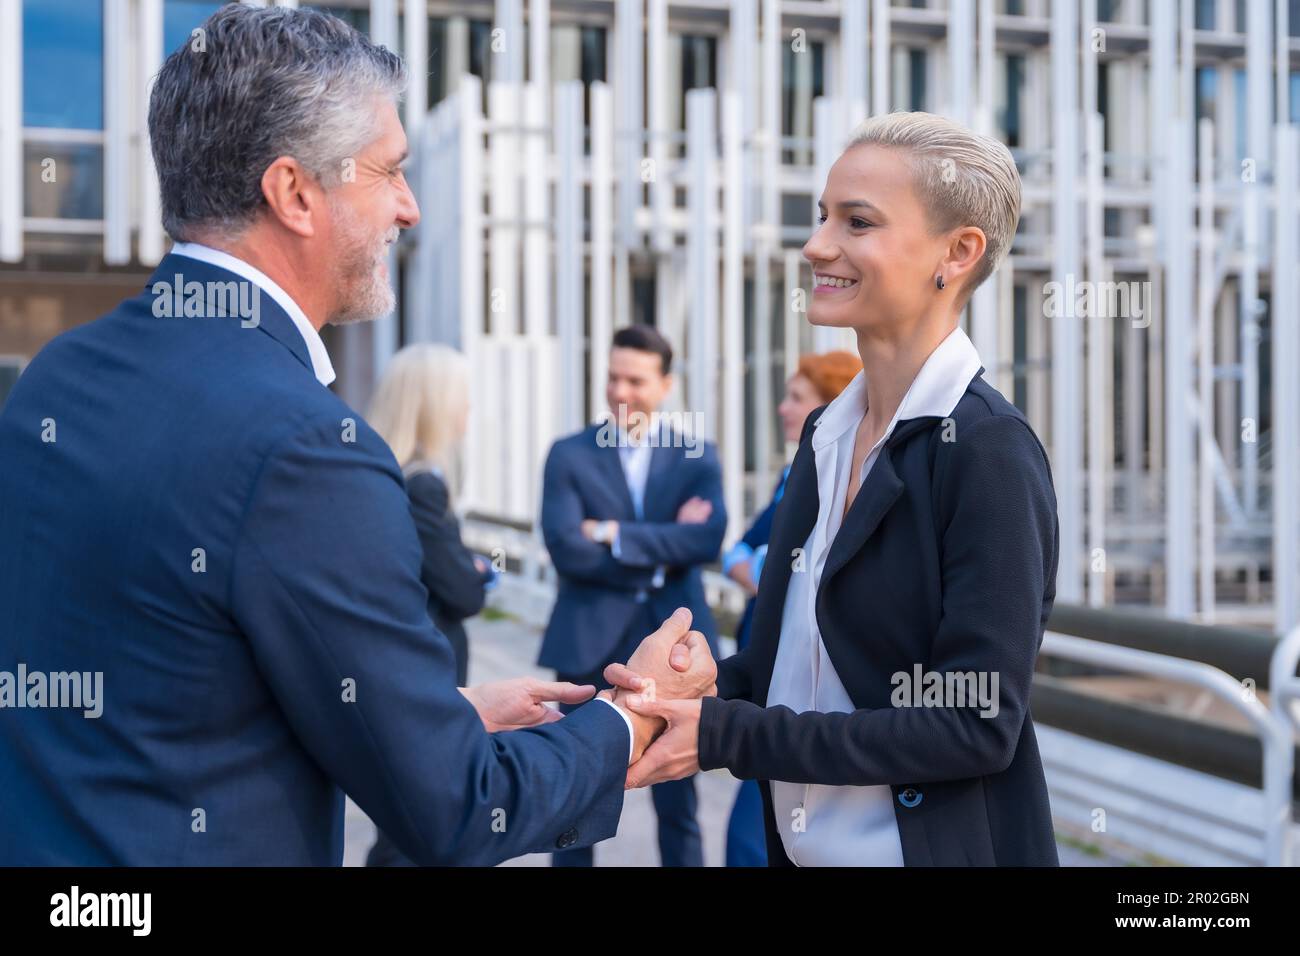 Business Leaders Shaking Hands in a Modern Metropolitan Setting Stock Photo